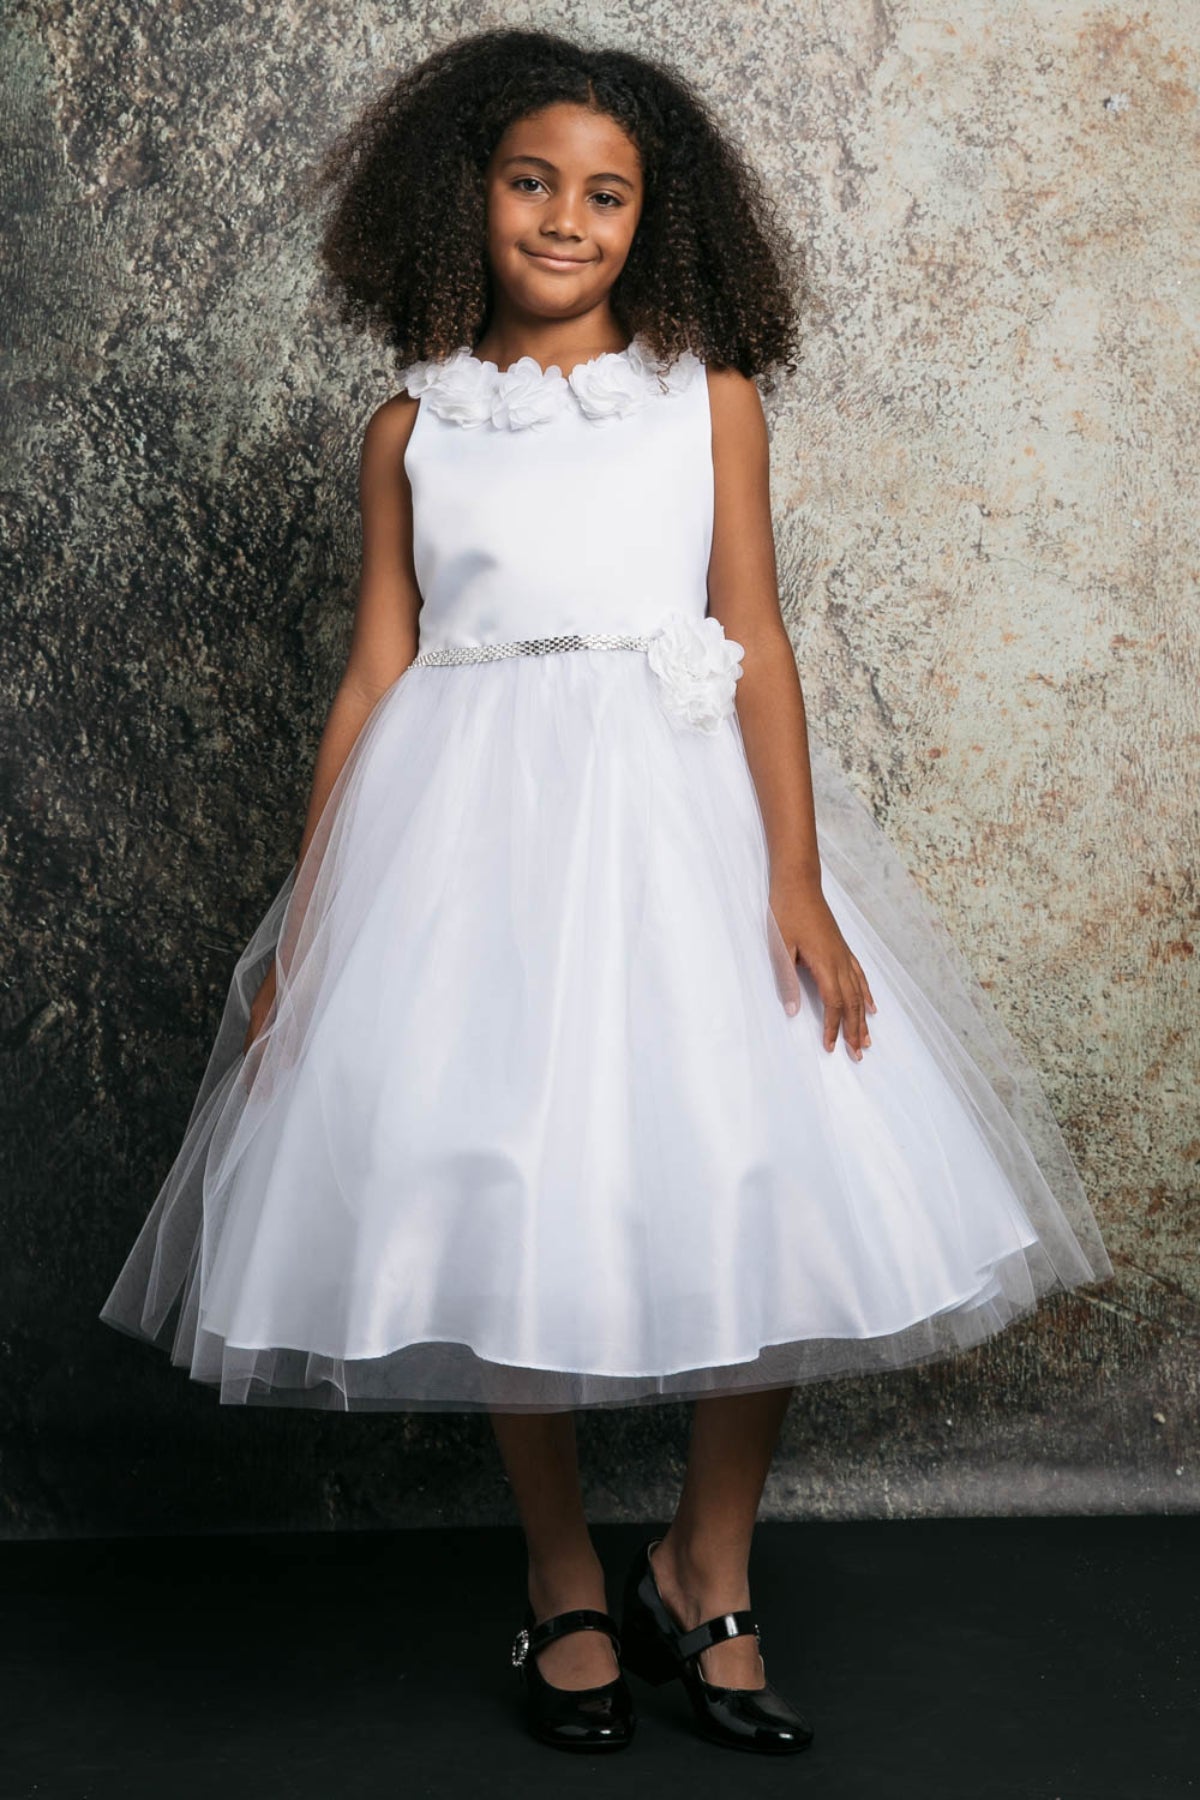 Maya Satin & Tulle Girls Dress with 3D Flowers and Crystal Belt